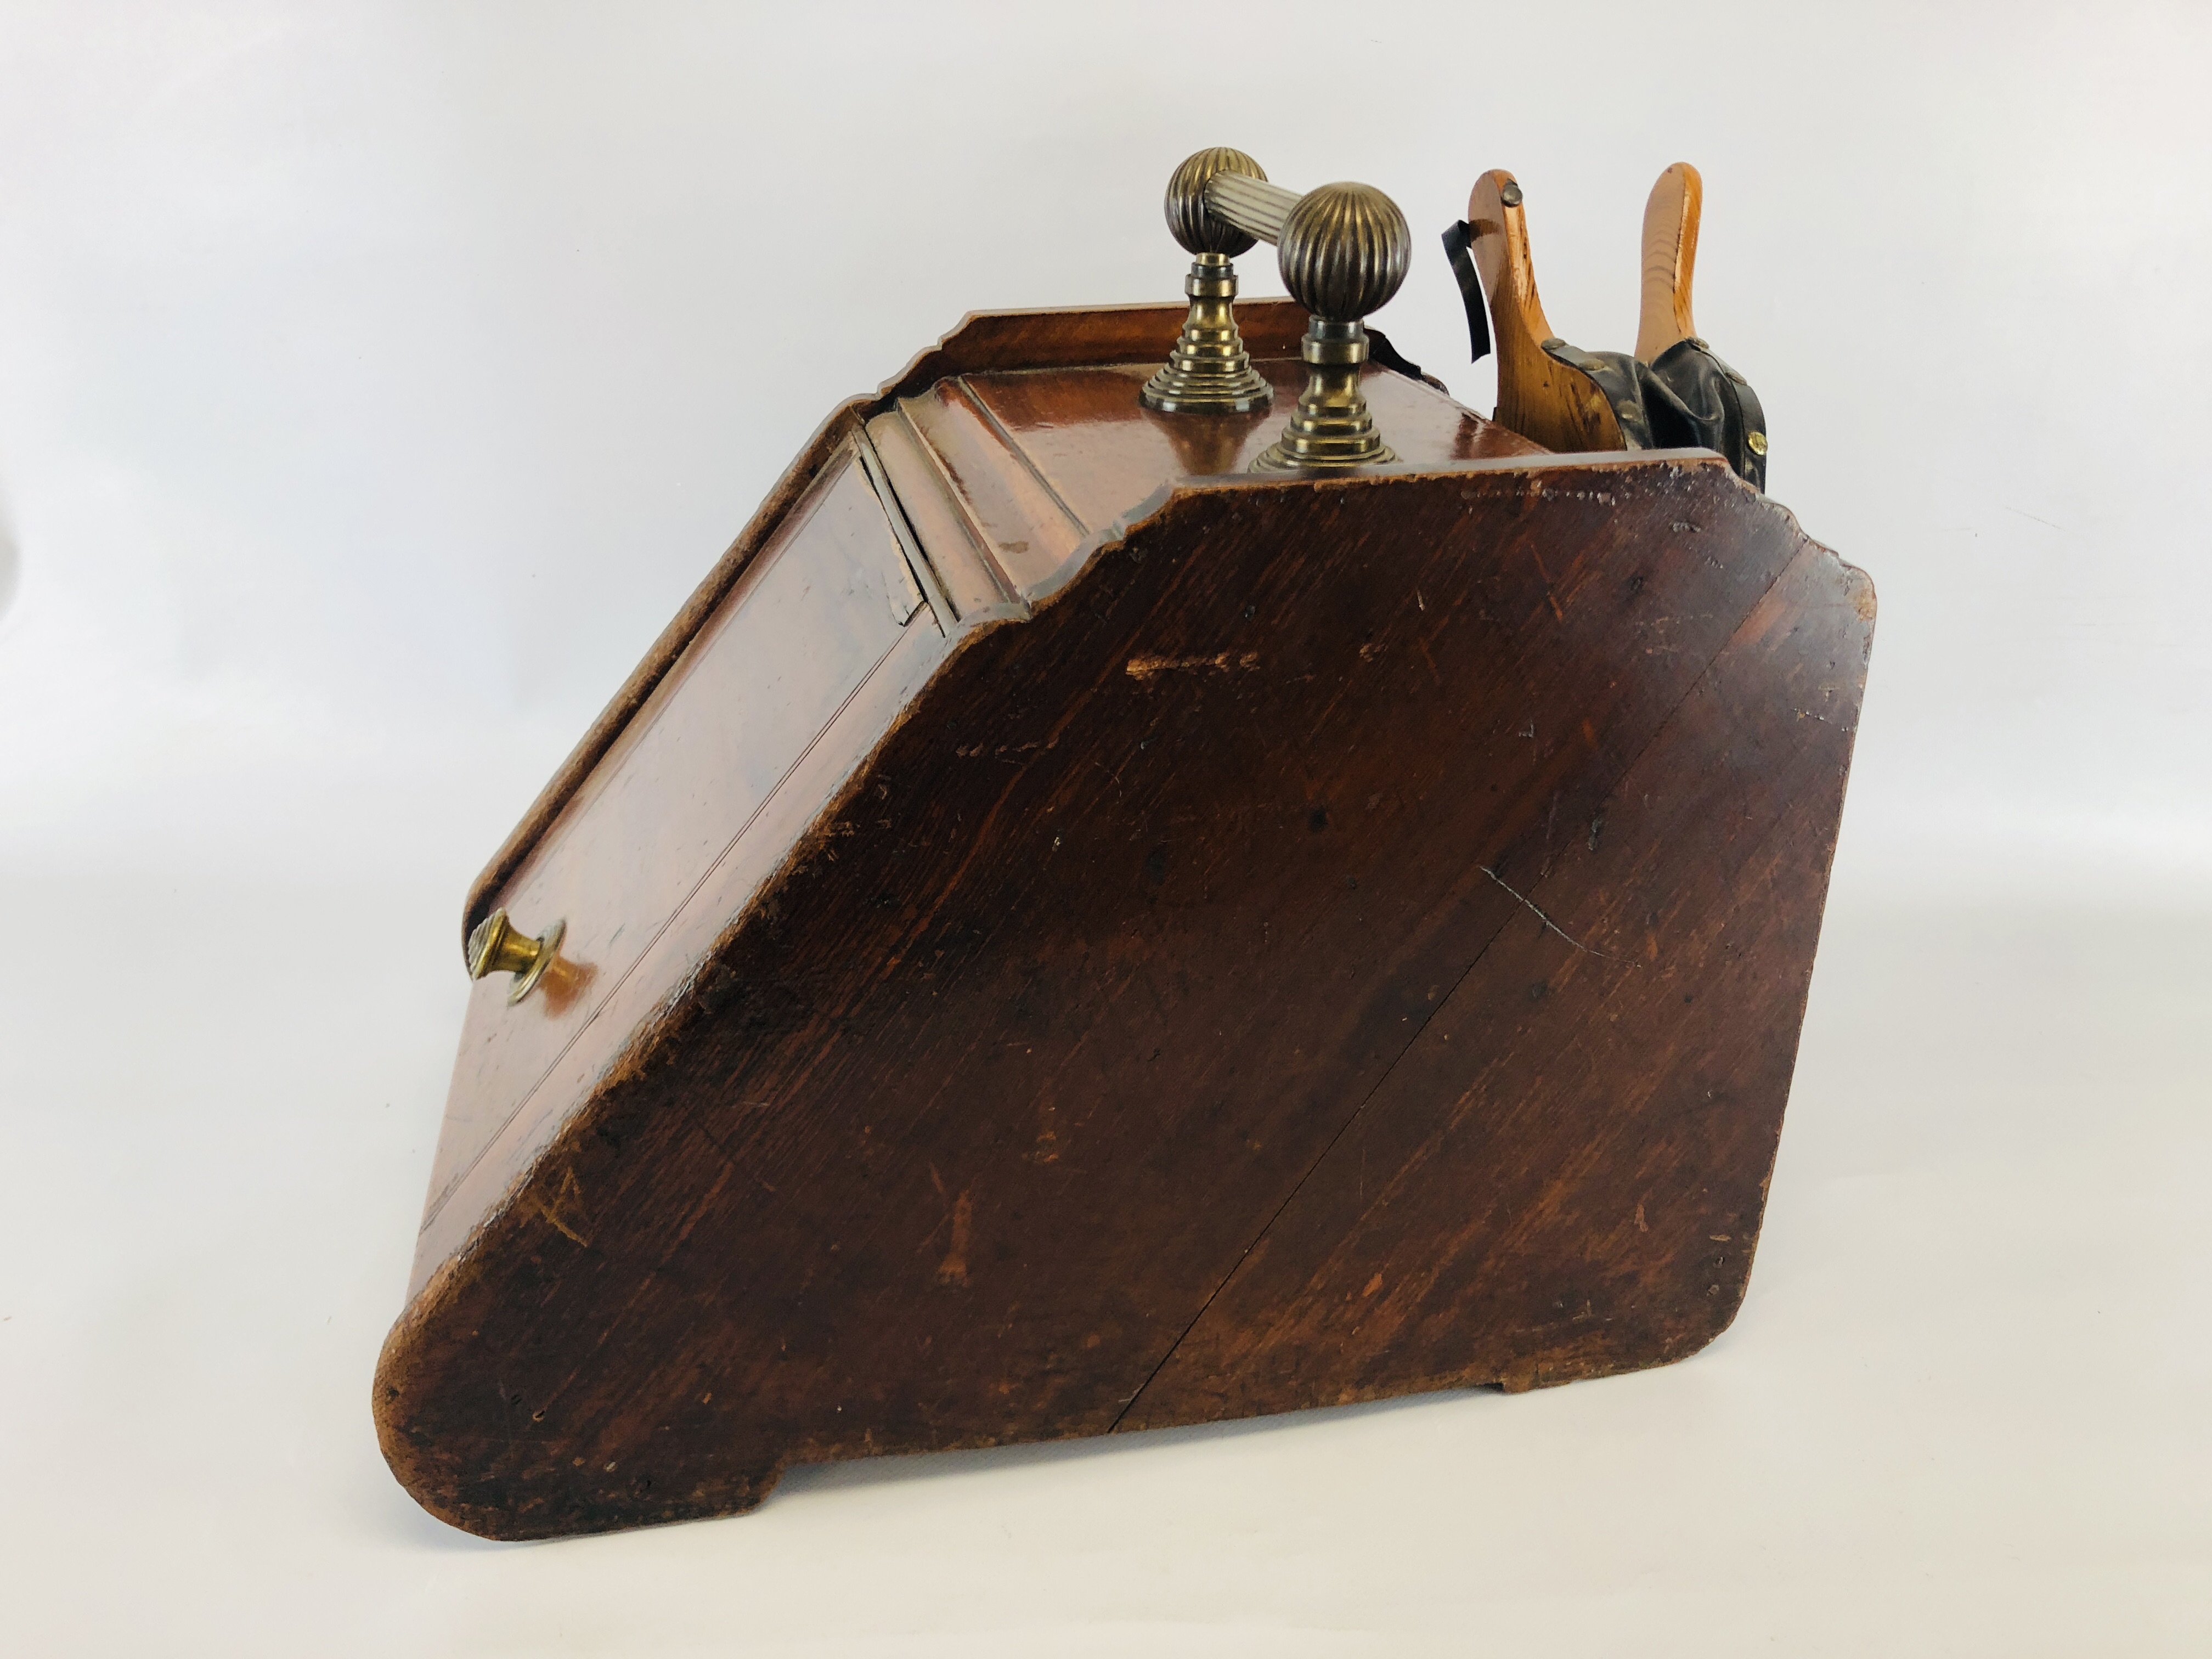 ANTIQUE EDWARDIAN MAHOGANY AND BRASS COAL BOX WITH BELLOWS. - Image 6 of 7